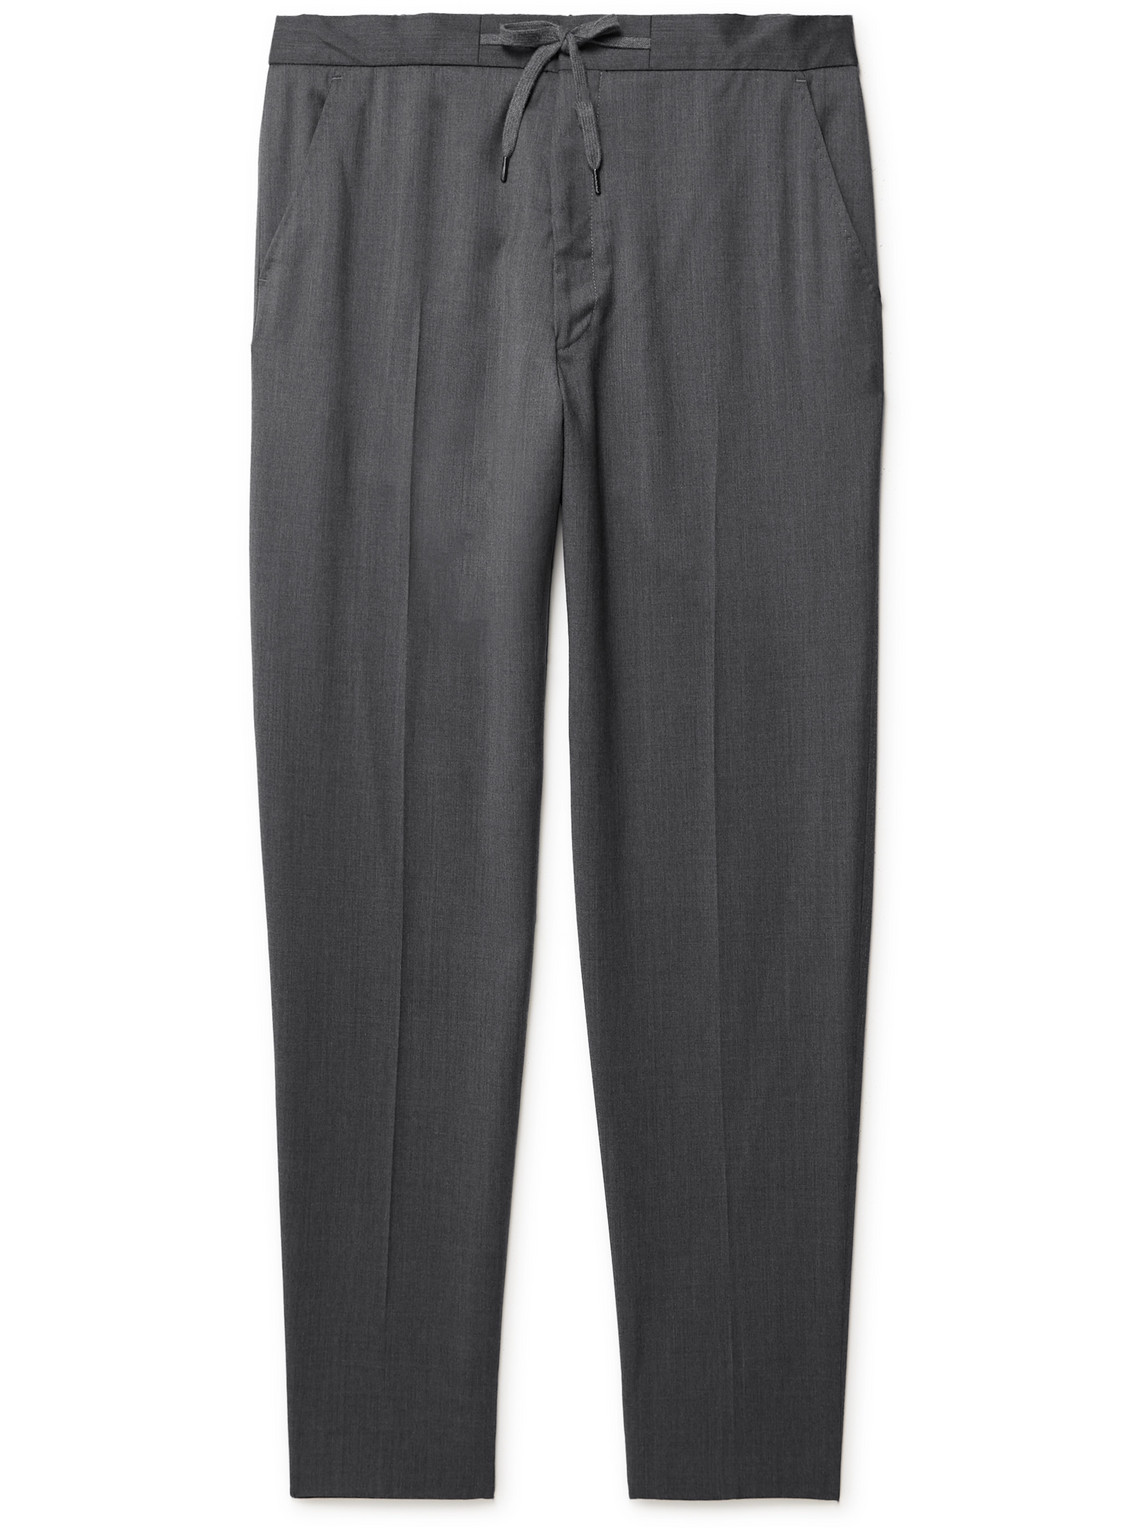 Mr P Tapered Wool Drawstring Trousers In Gray